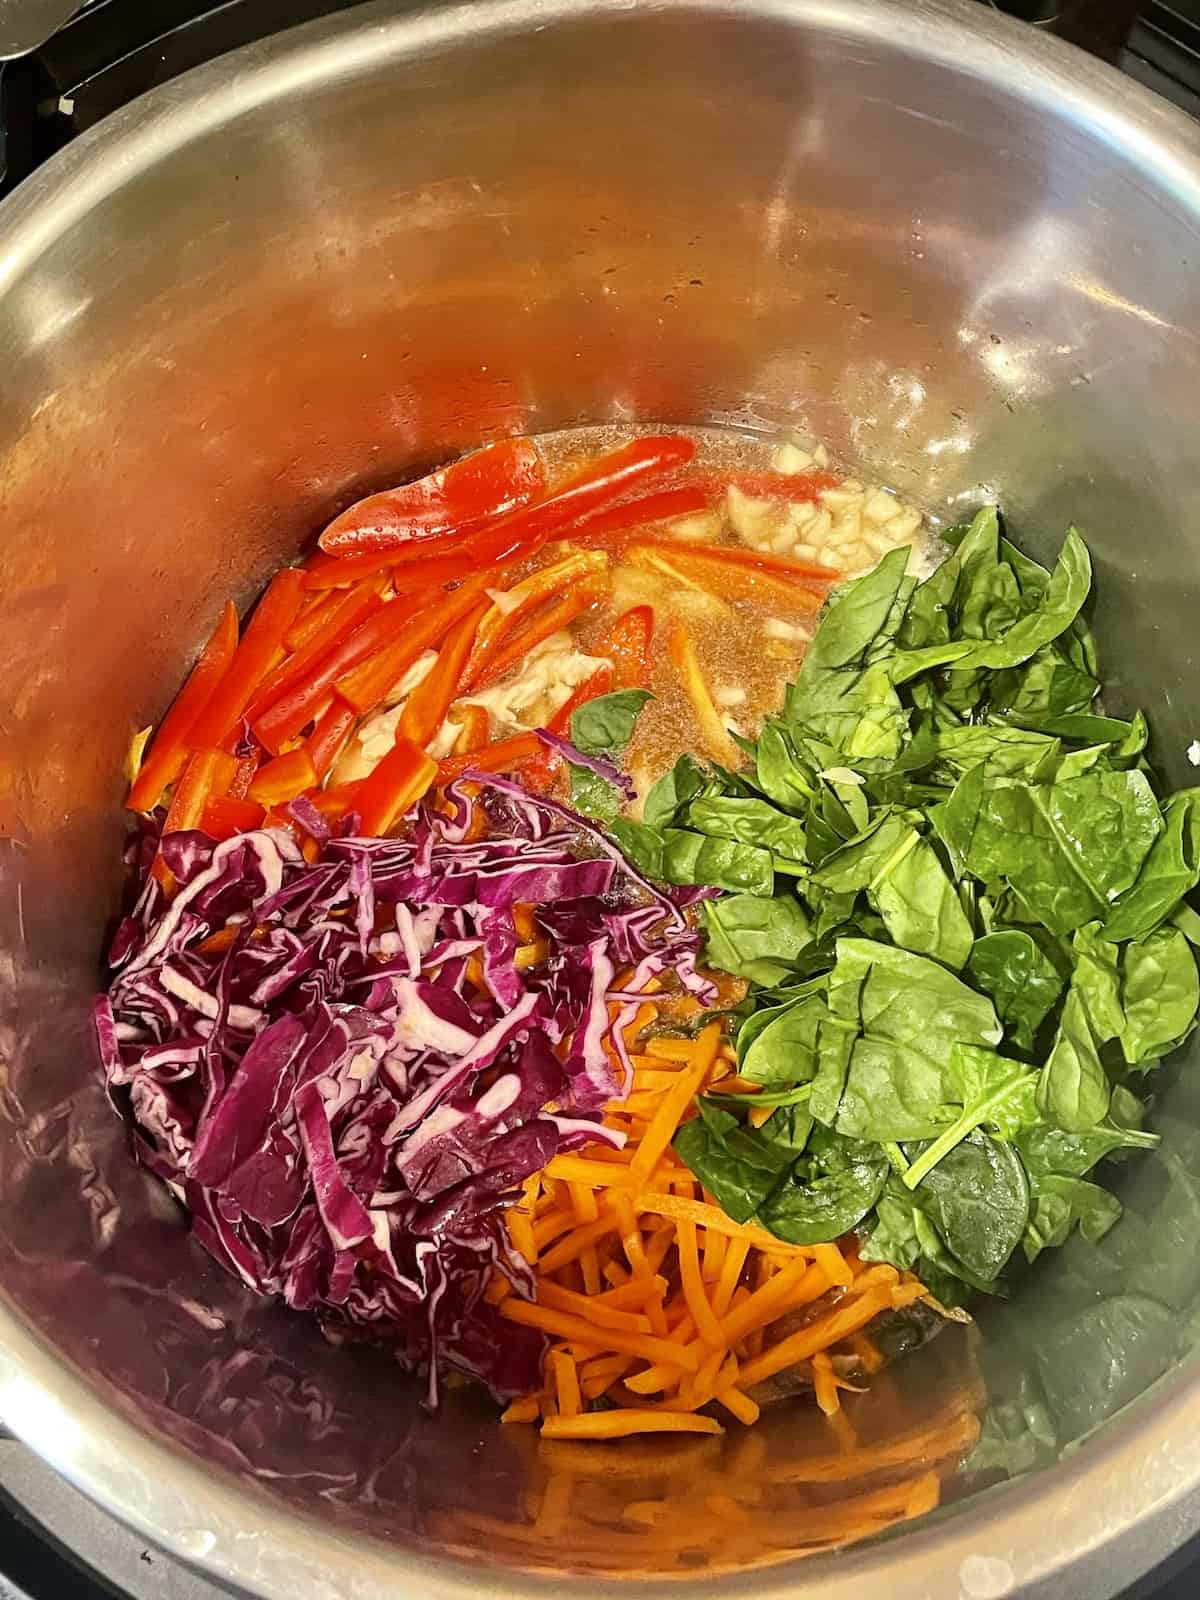 spinach, cabbage, carrots, peppers, and chicken in a pressure cooker